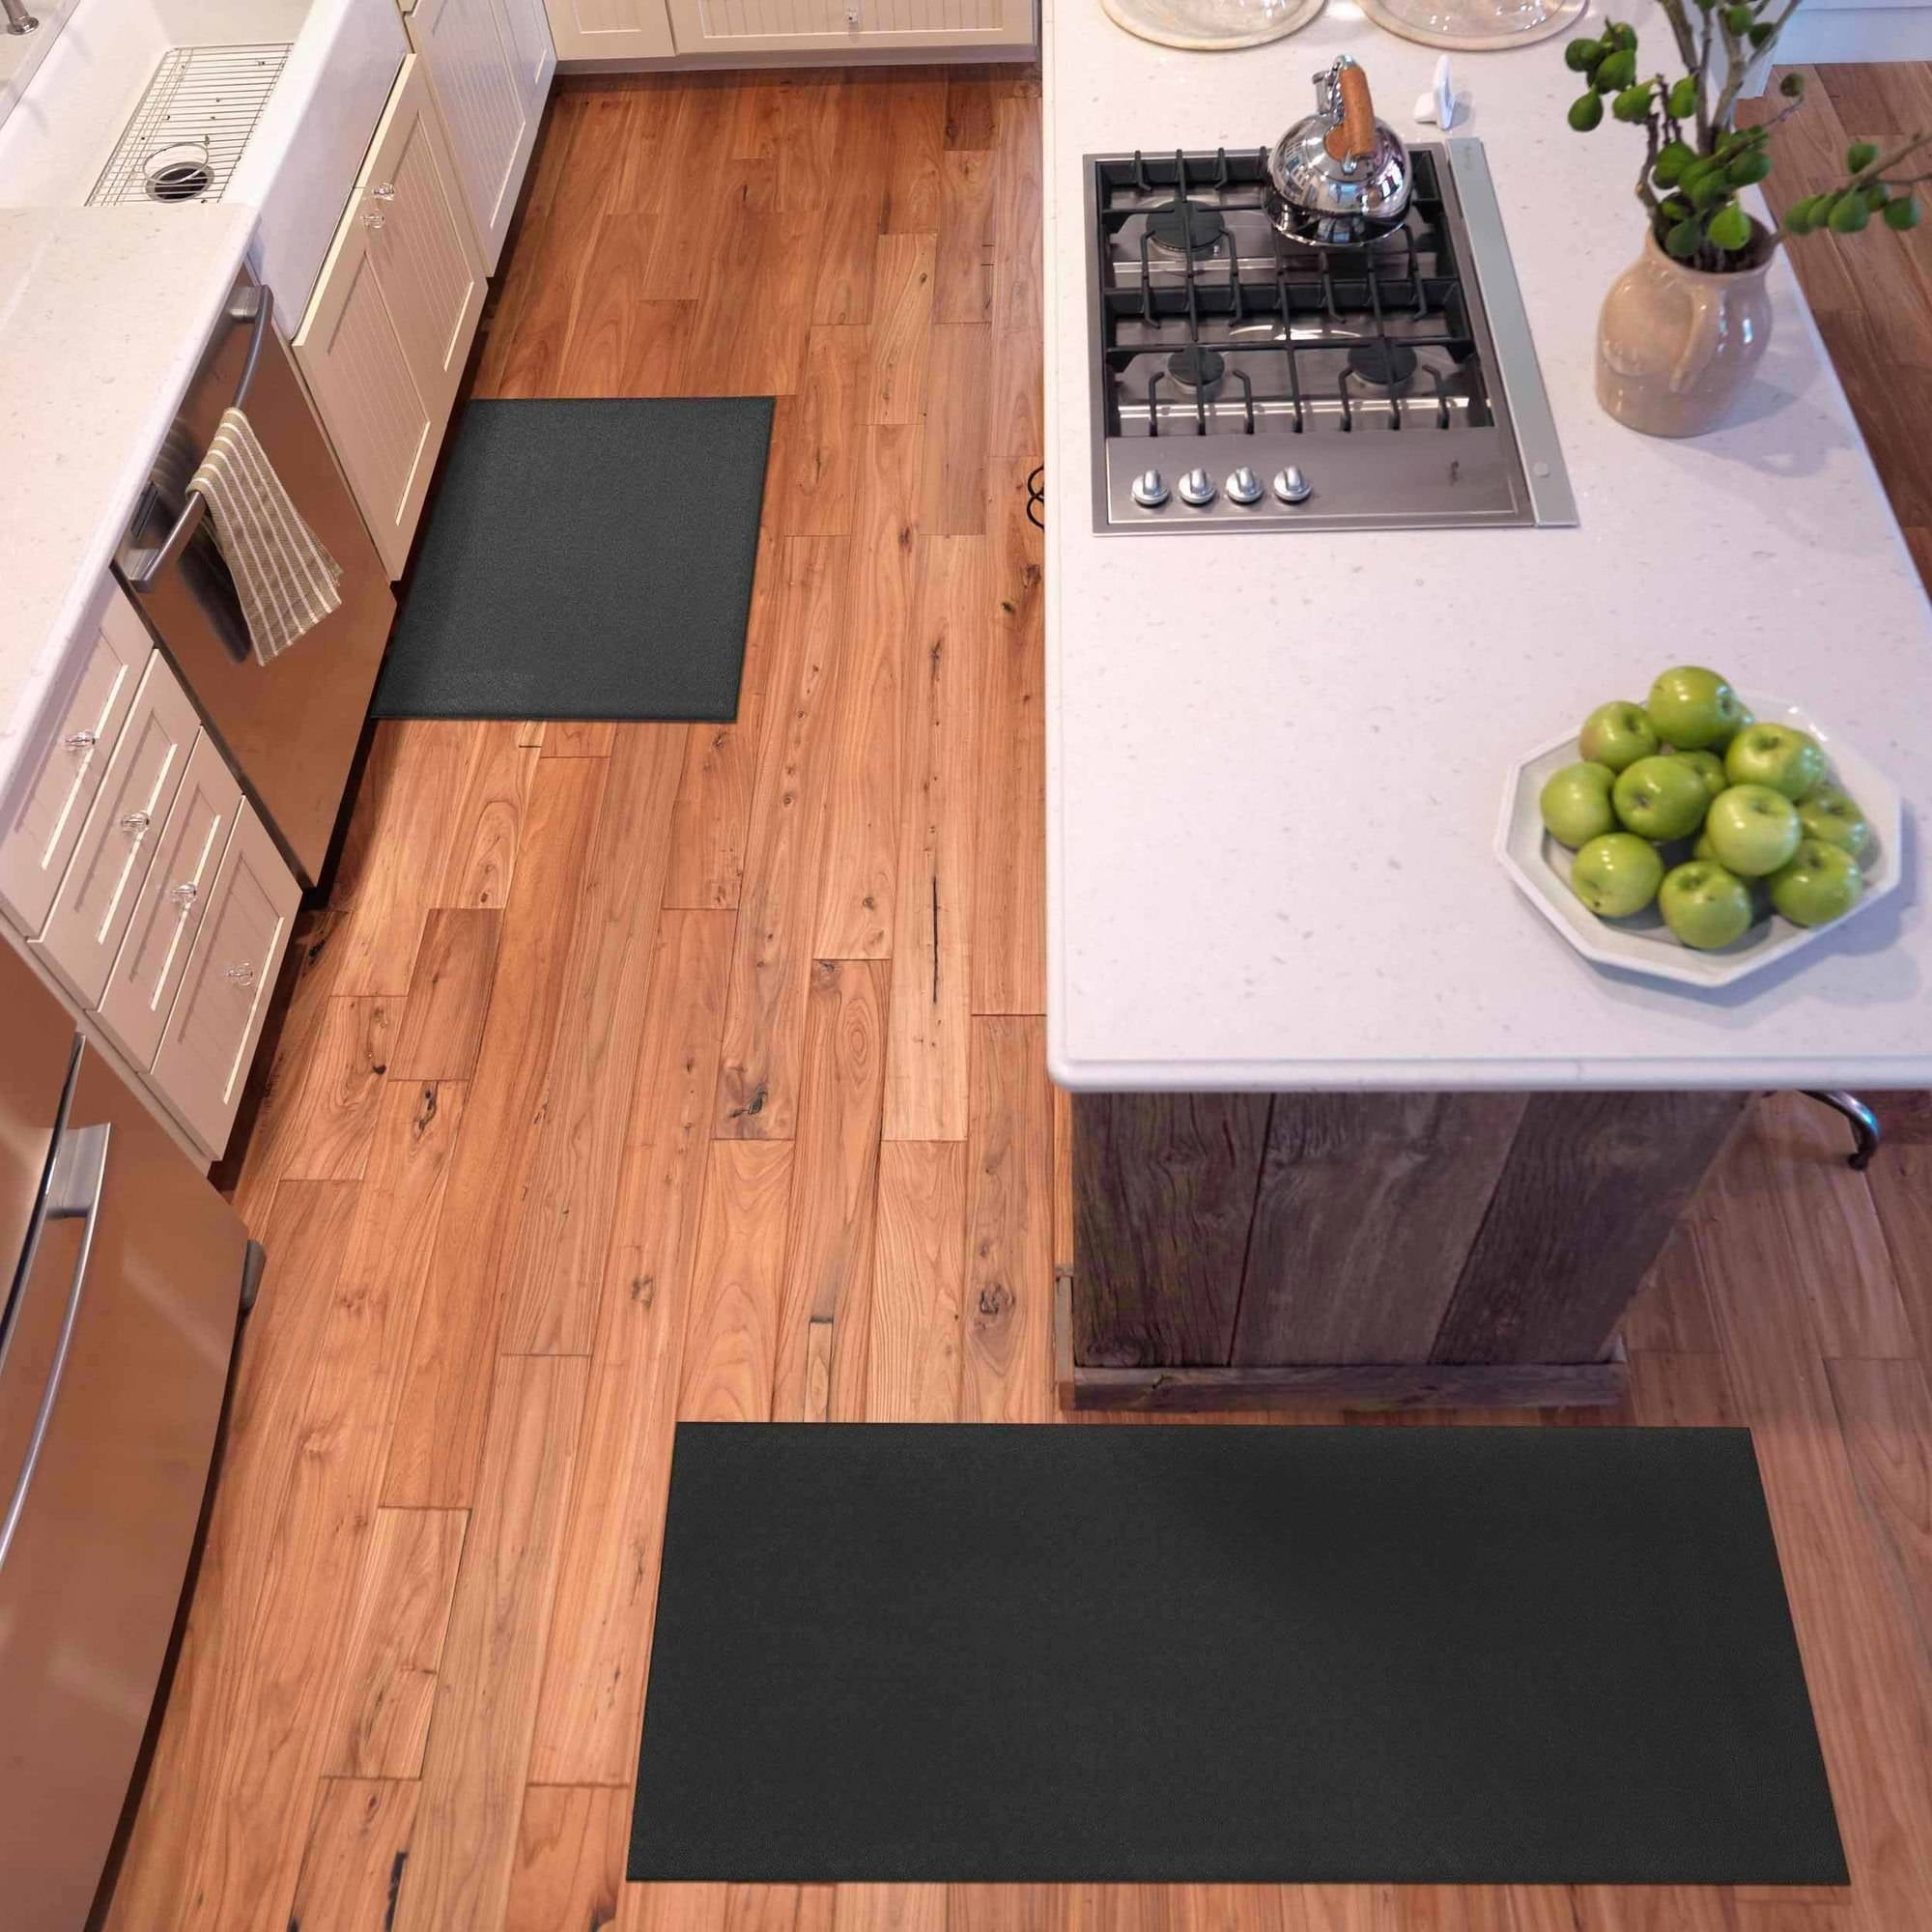 Mainstays Cushioned Kitchen Mat Rich, Best Kitchen Rugs For Hardwood Floors